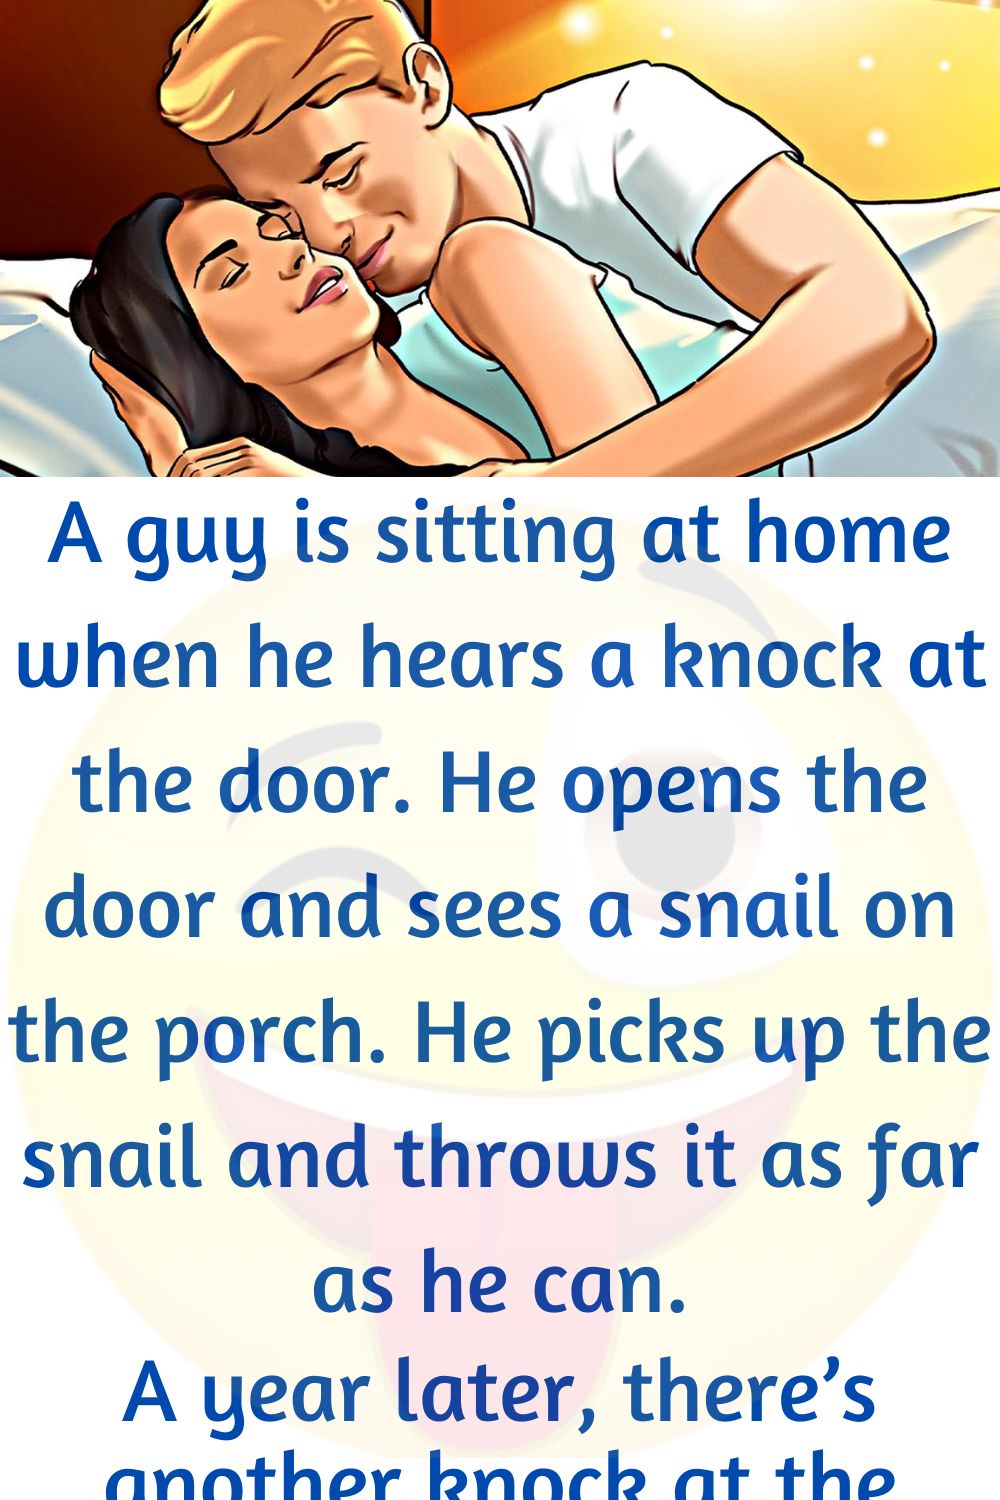 A guy is sitting at home